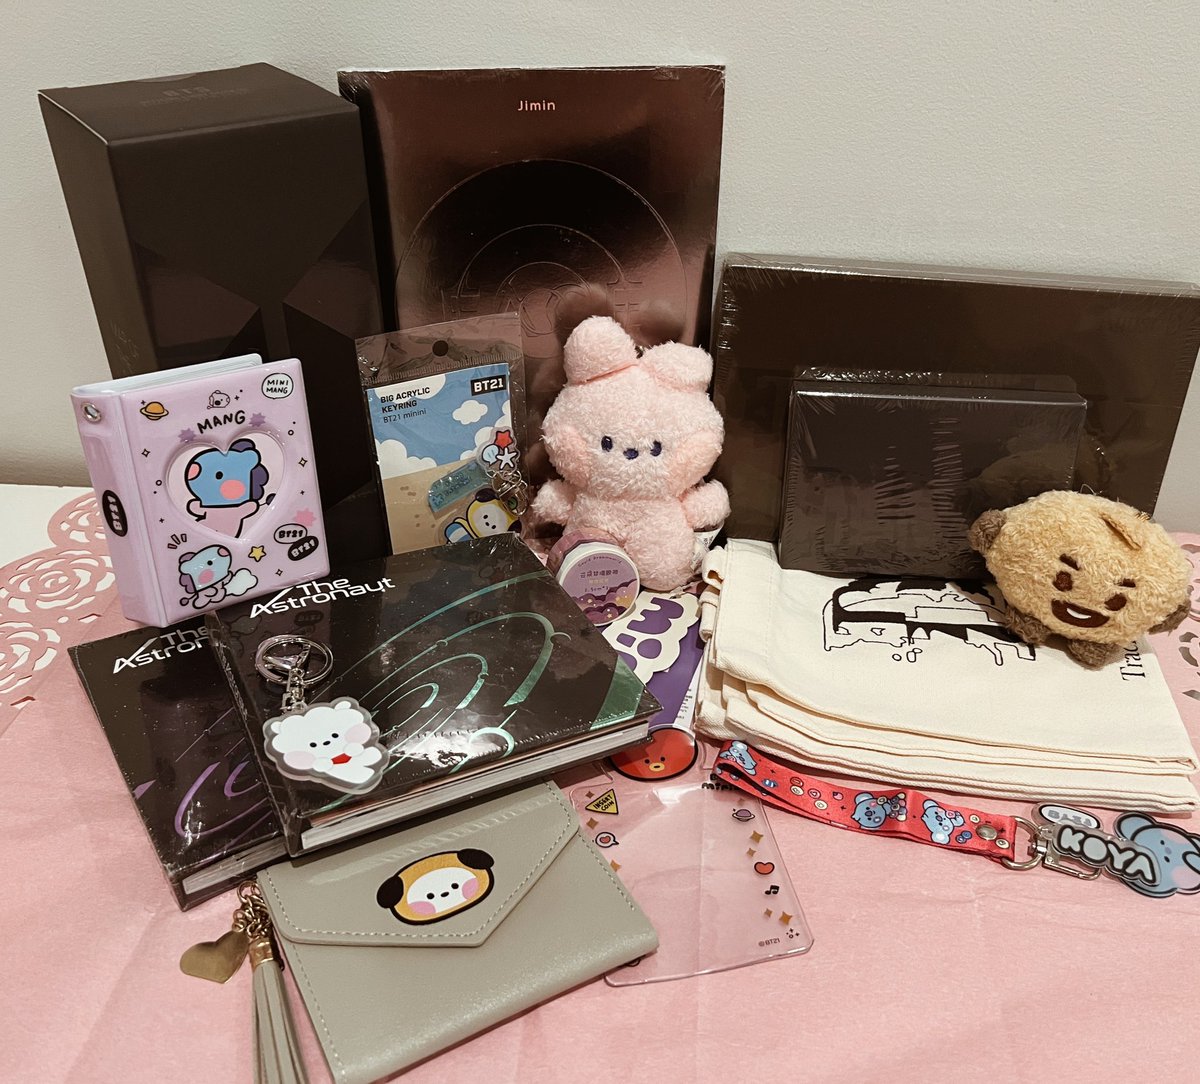 ⭑ Surprise Gift Box Giveaway ⭑ ⋆ 1 winner ♡ ⋆ rt + like ⋆ followers only — worldwide | ends 8.31